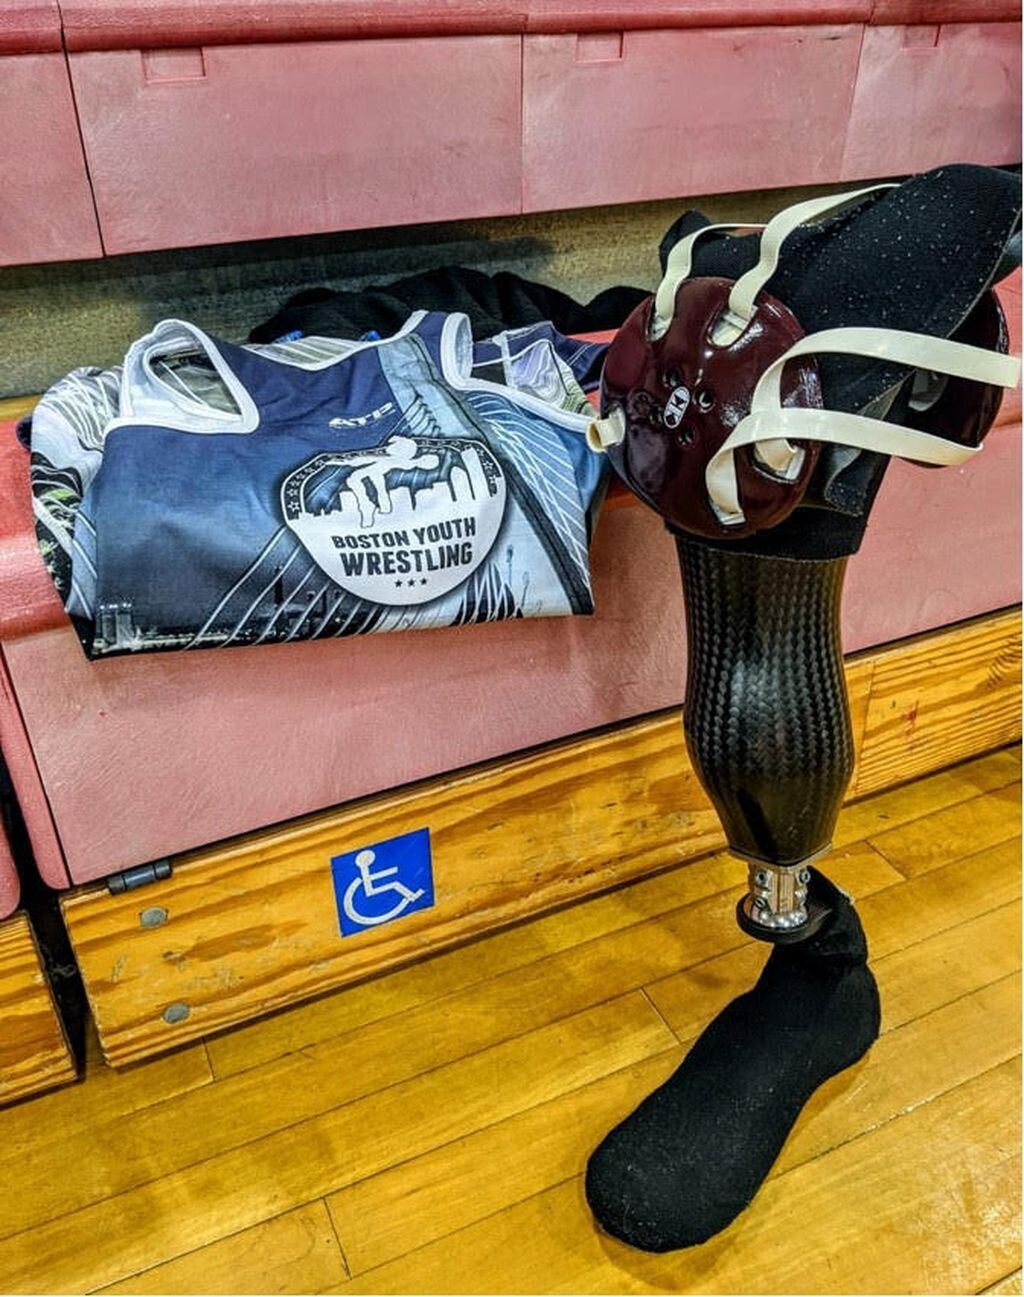 When Dorchester's Malaky Lewis is competing on the wrestling mat, he sheds his prosthetic right leg. COURTESY PHOTO